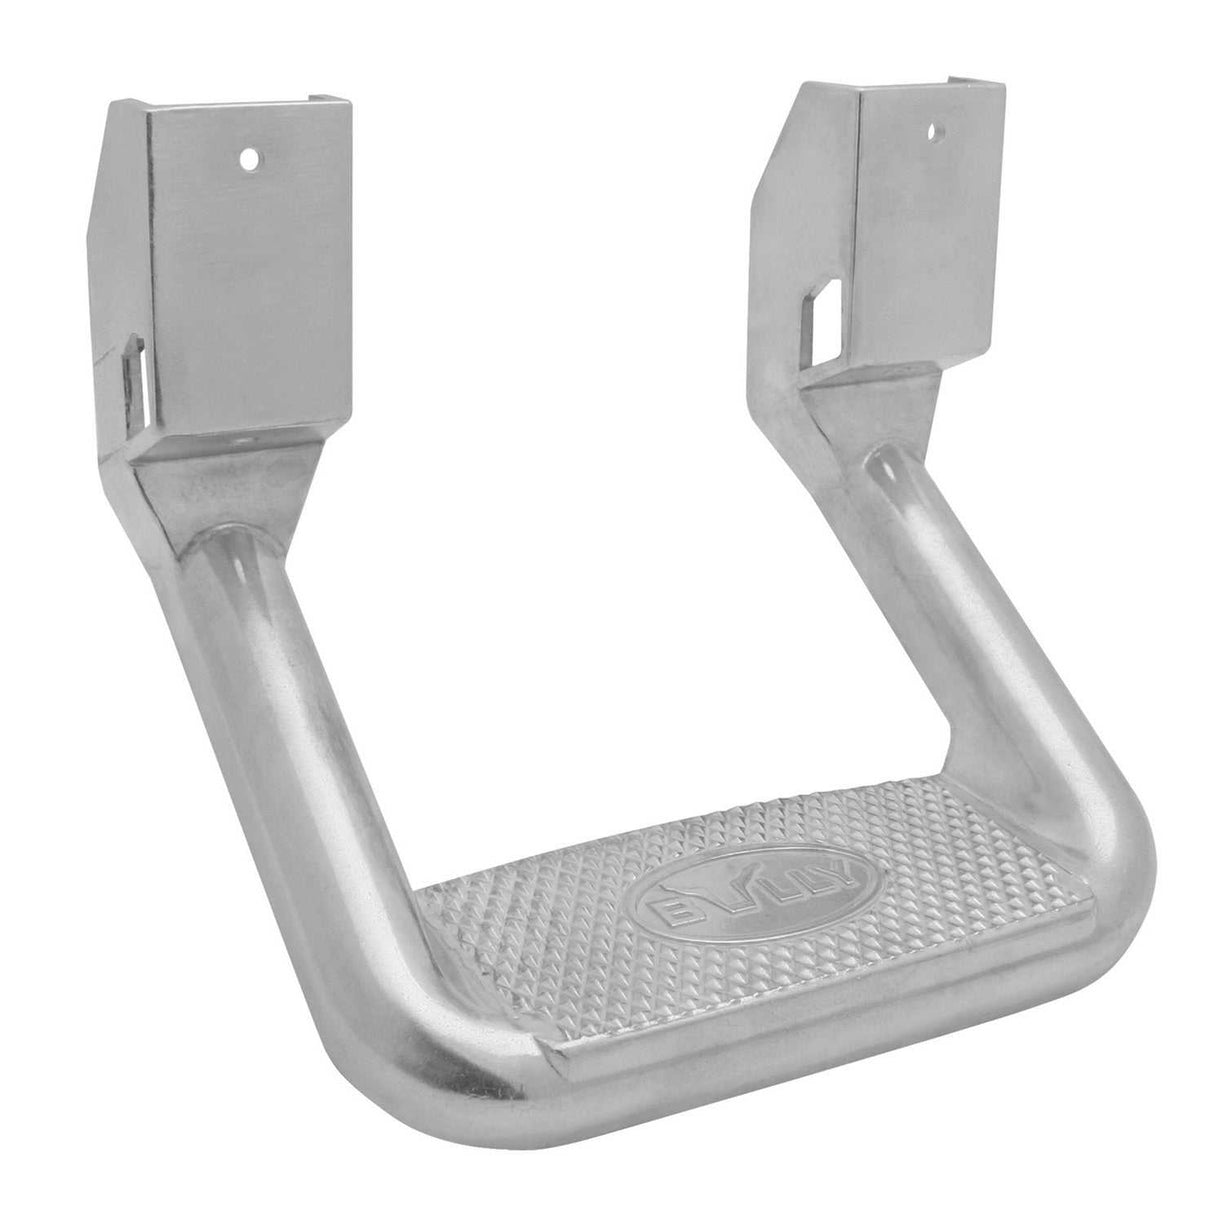 AS-600 Bully Truck Accessory (Pilot) Truck Step Cab Mount